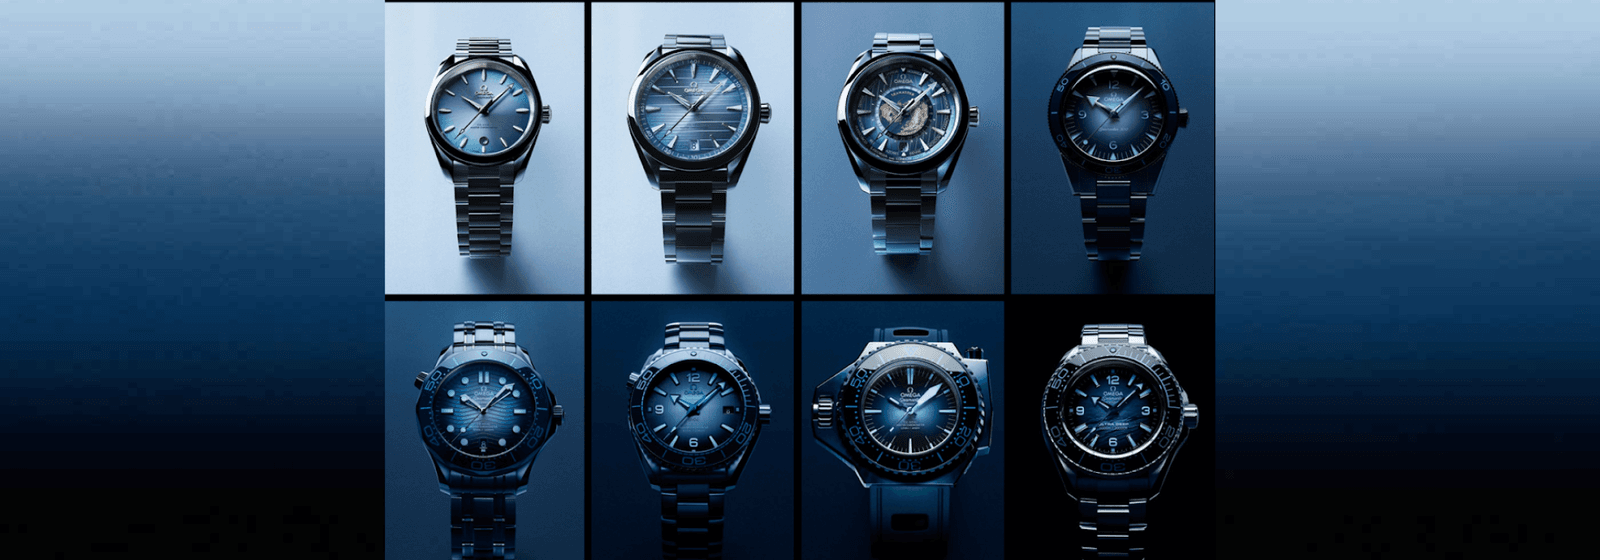 OMEGA Celebrates The Summer Blues In Style: 11 Watches Launched In The Seamaster Collection